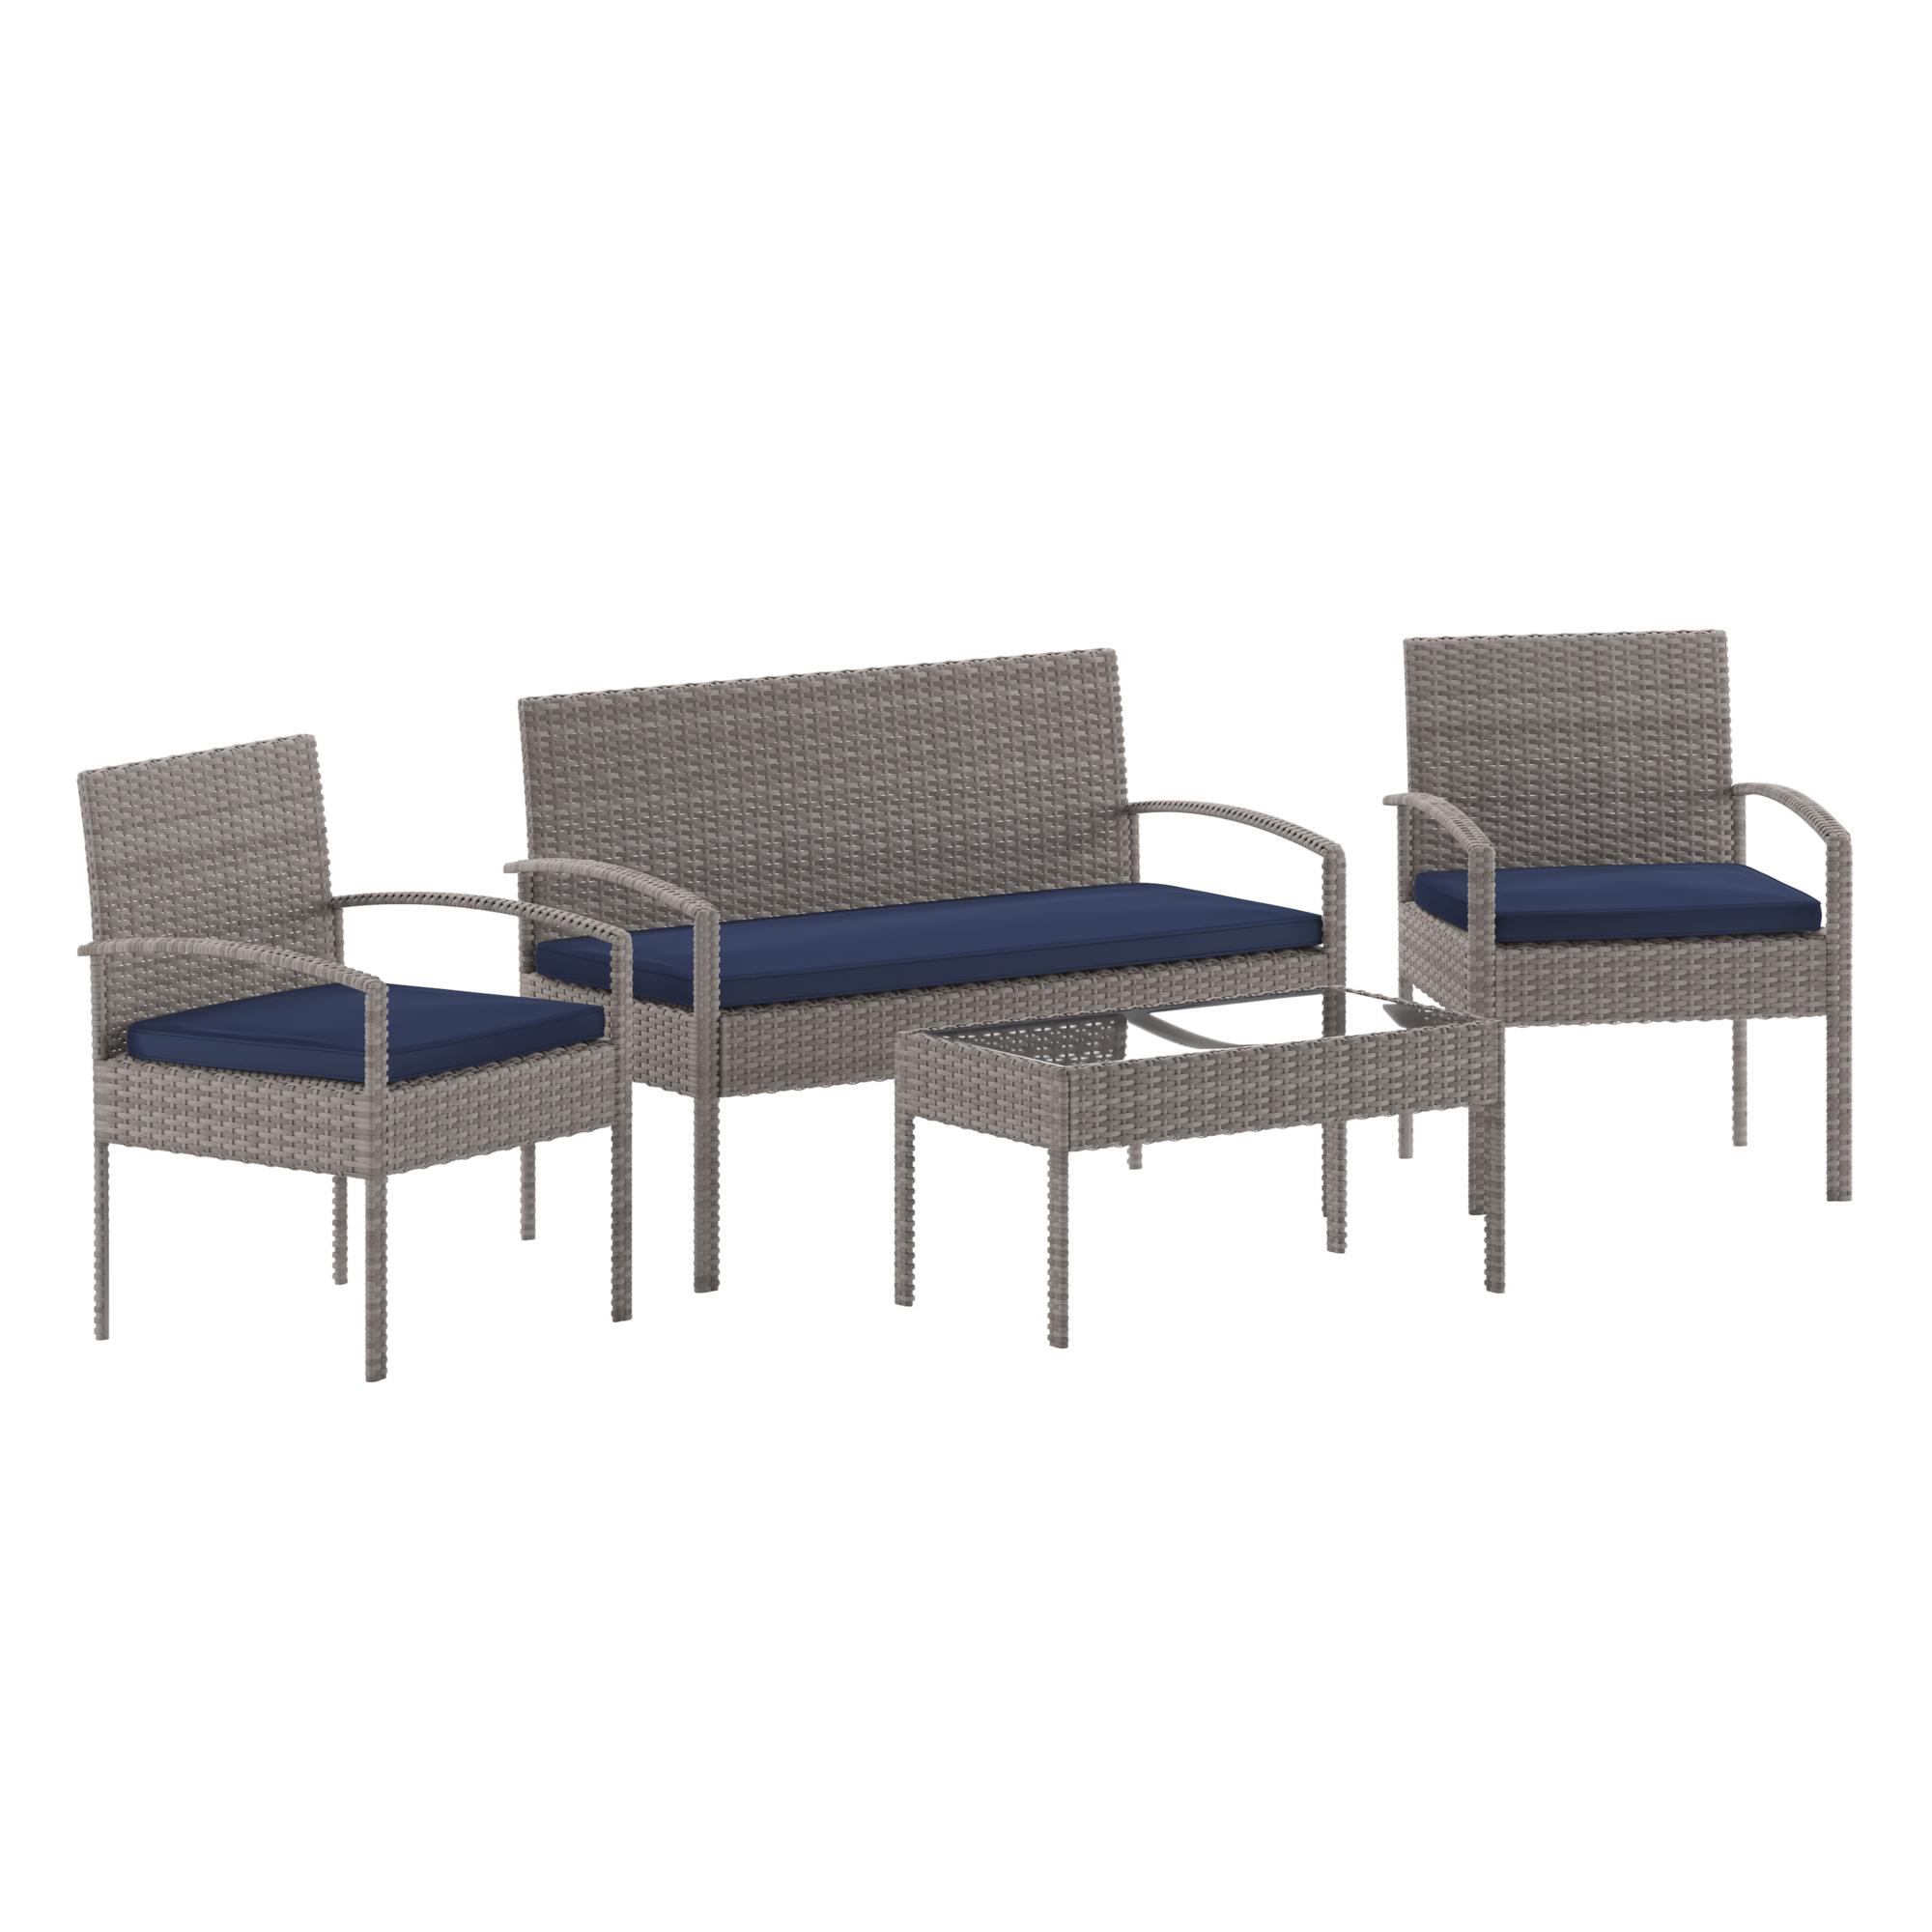 Flash Furniture, 4 Piece Gray Patio Set with Navy Cushions, Pieces (qty.) 1 Primary Color Gray, Seating Capacity 4 Model JJS312GYNV